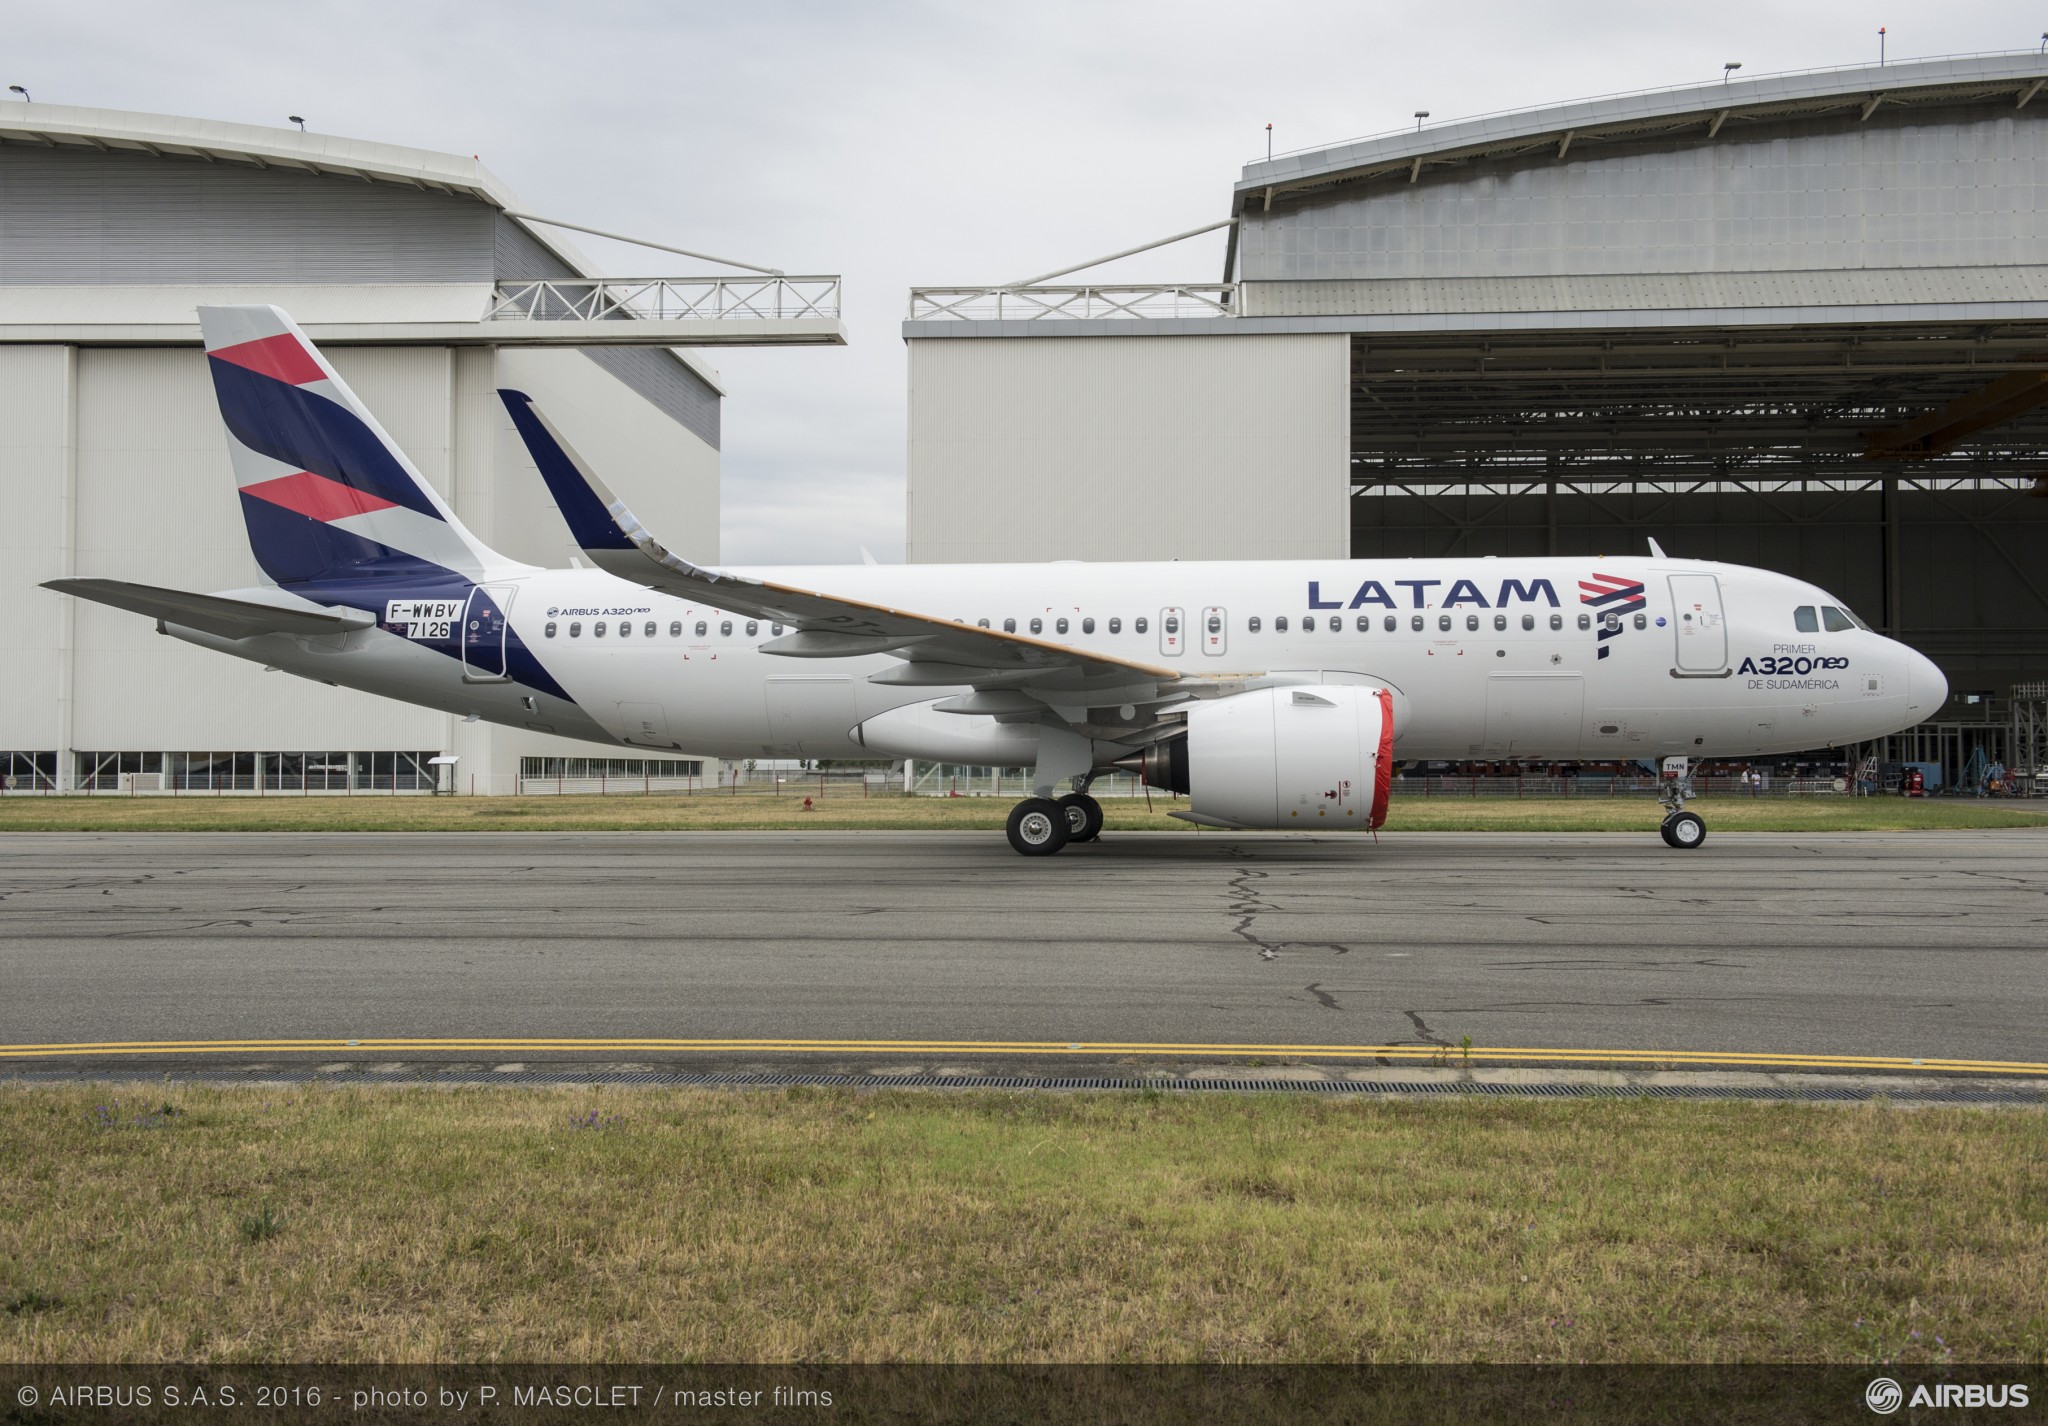 LATAM initiates final phase of reorganisation process